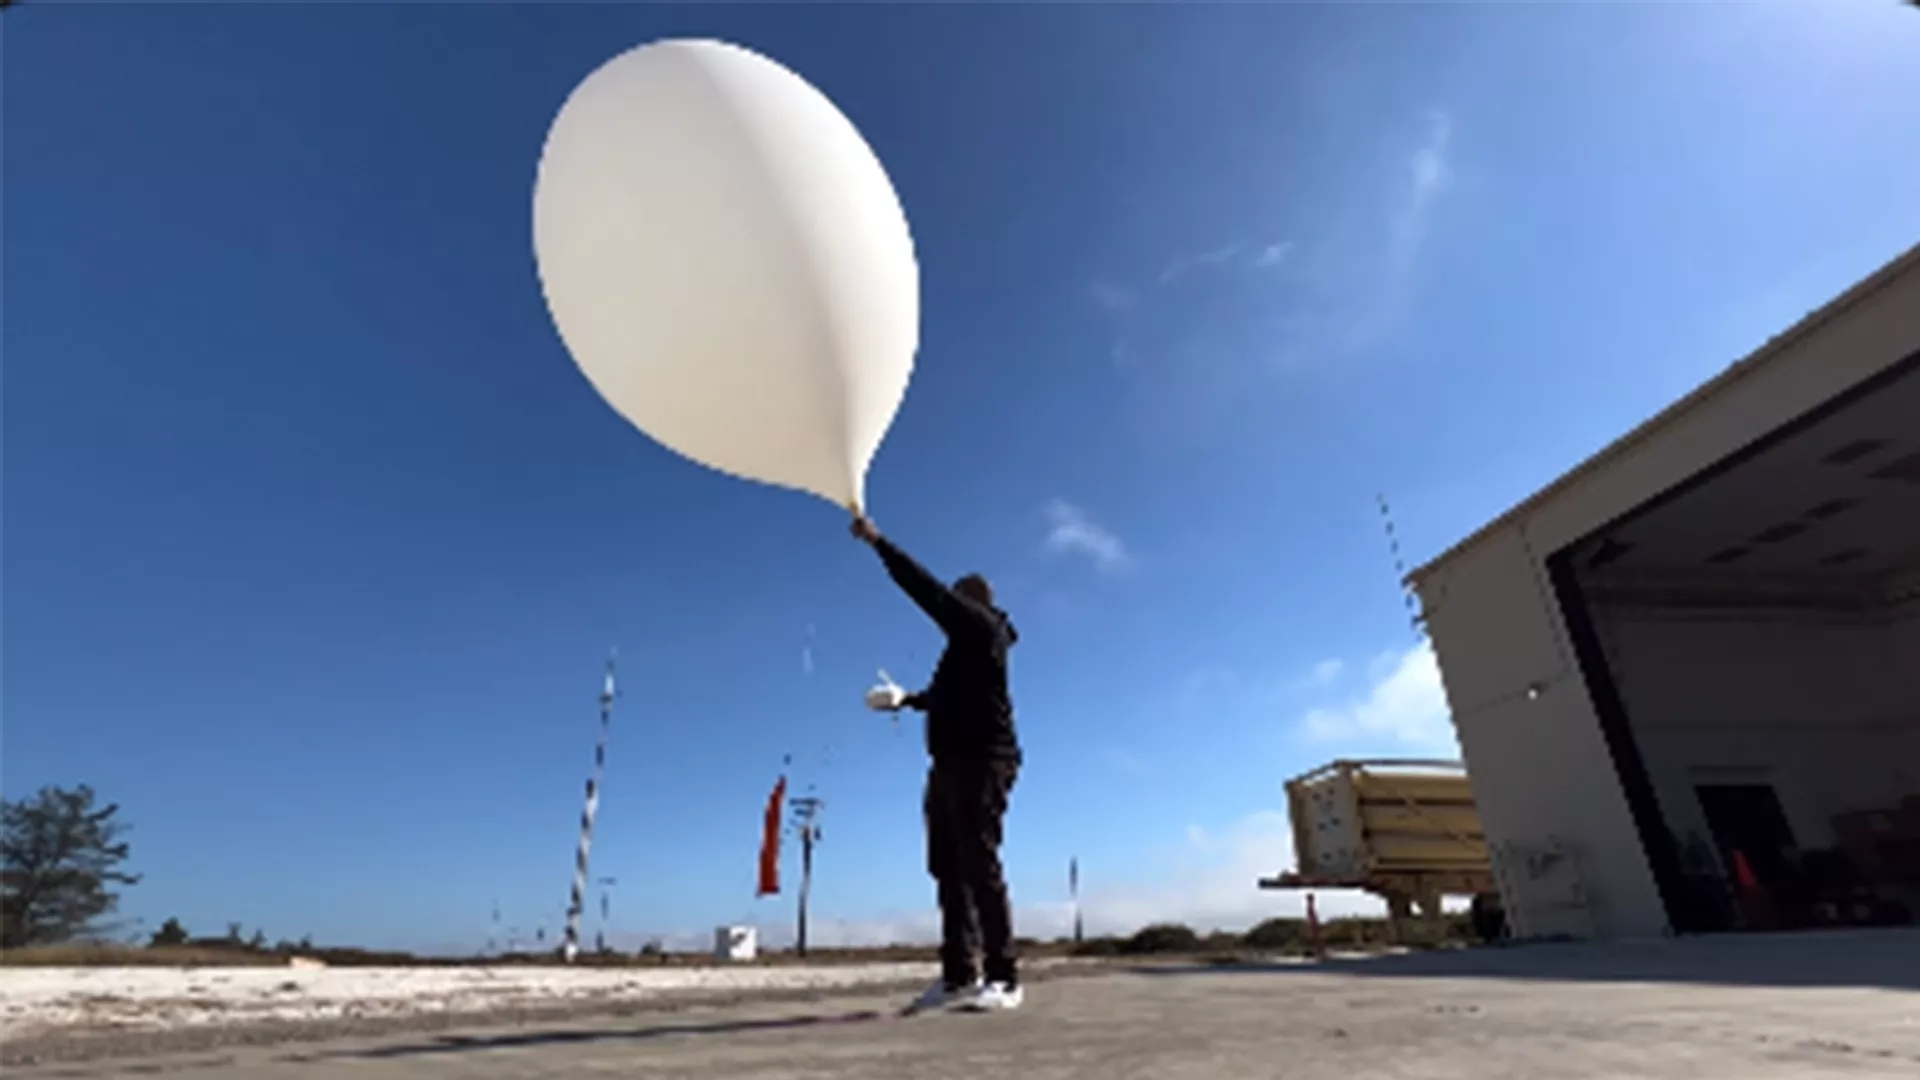 Man about to release a big white weather balloon outdoors.